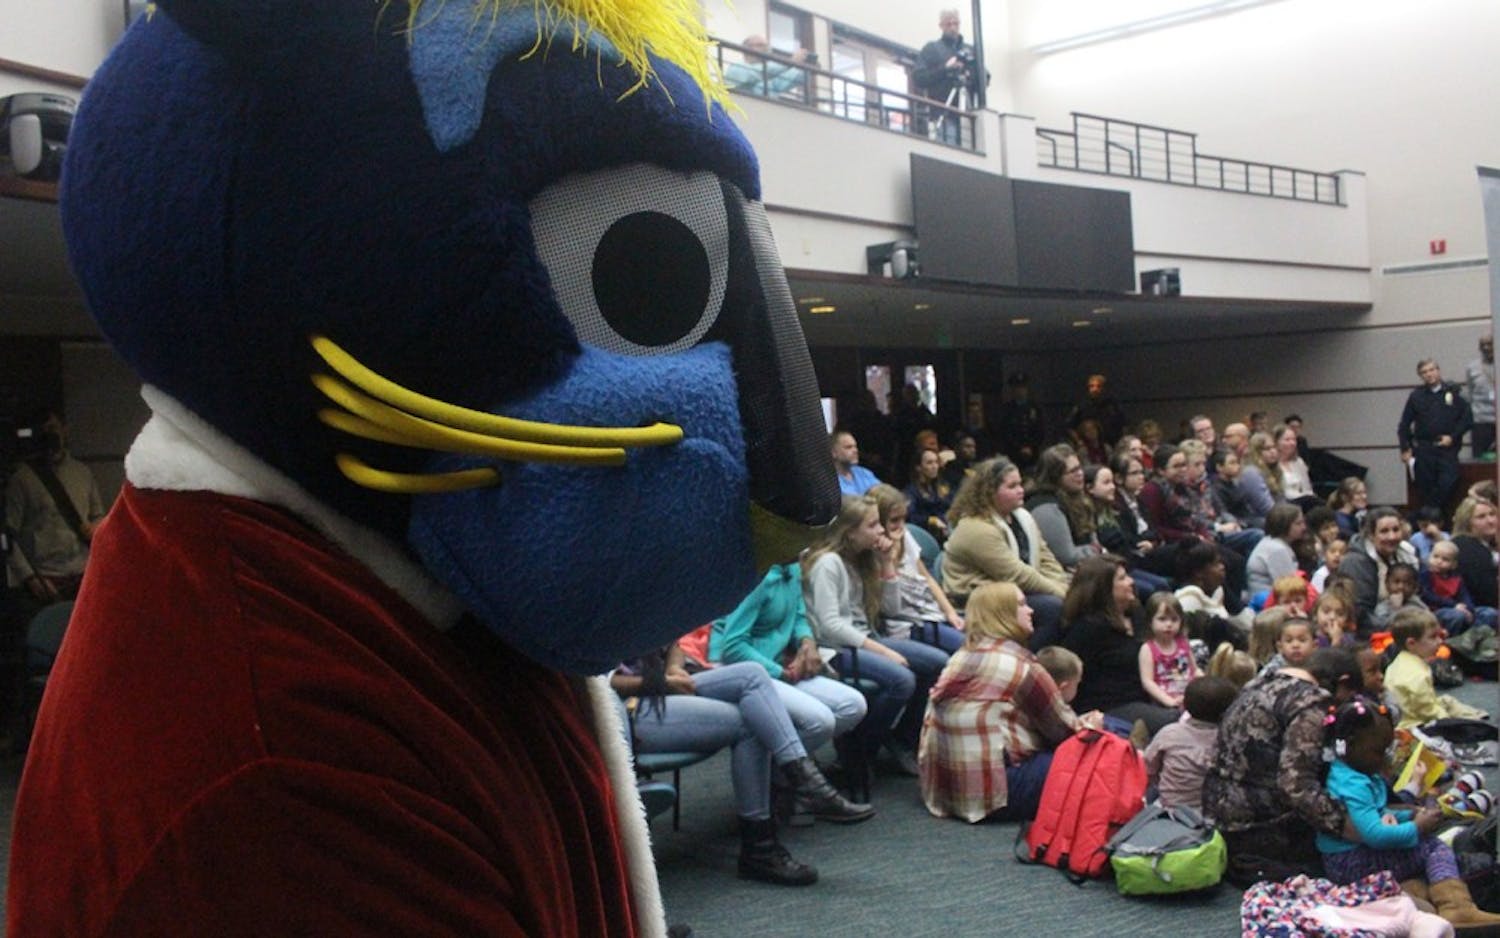 Indiana Pacers' mascot, Boomer the Panther, looks on at city hall as the Pacers hand out presents hand out presents to Bloomigton children. This event took place at 2:30 p.m. on Dec. 7.